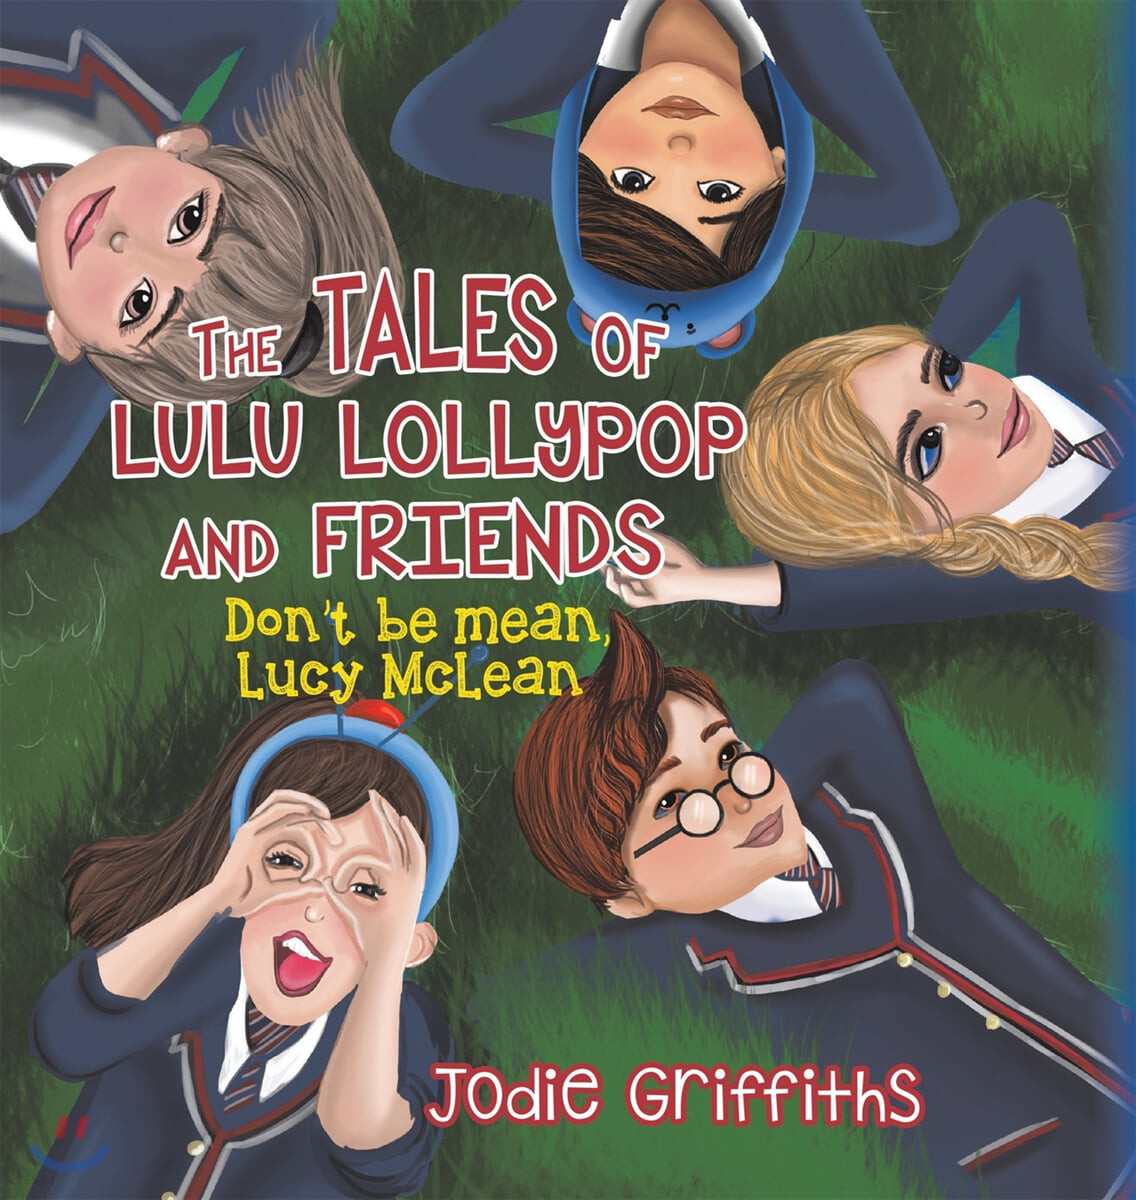 (The) Tales of Lulu Lollypop and friends 